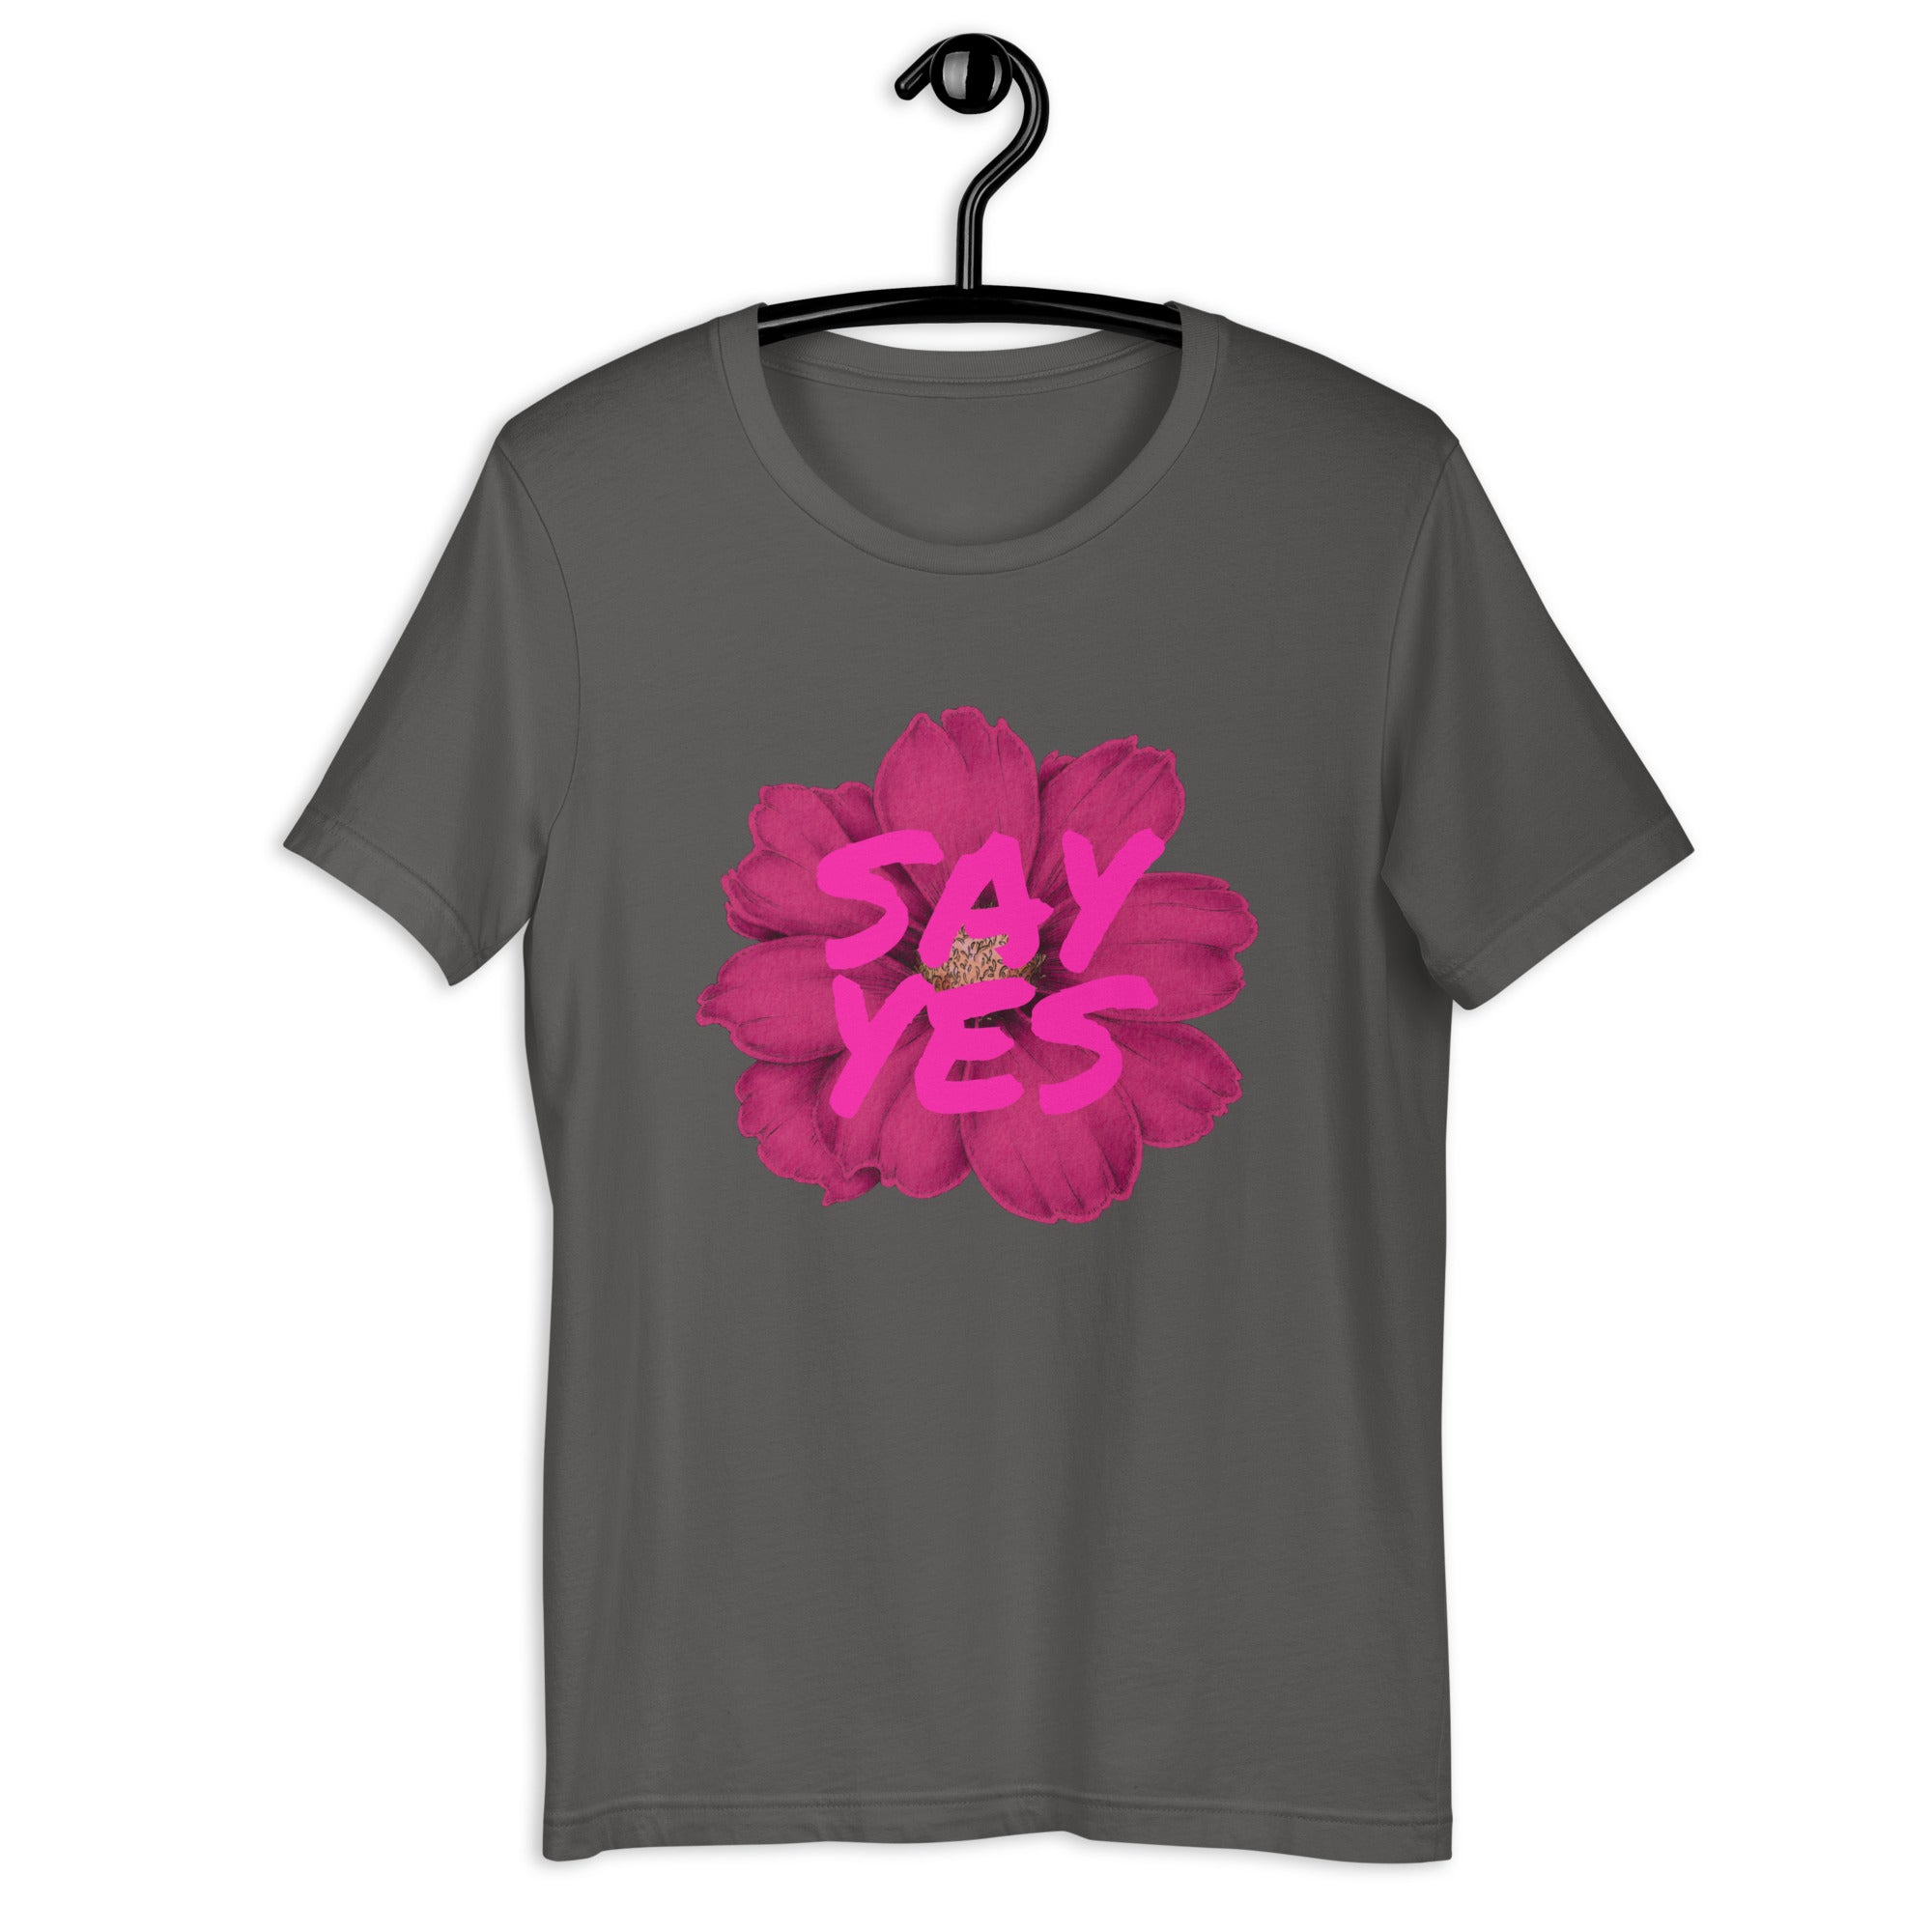 Say Yes - Plus Size Graphic Tee